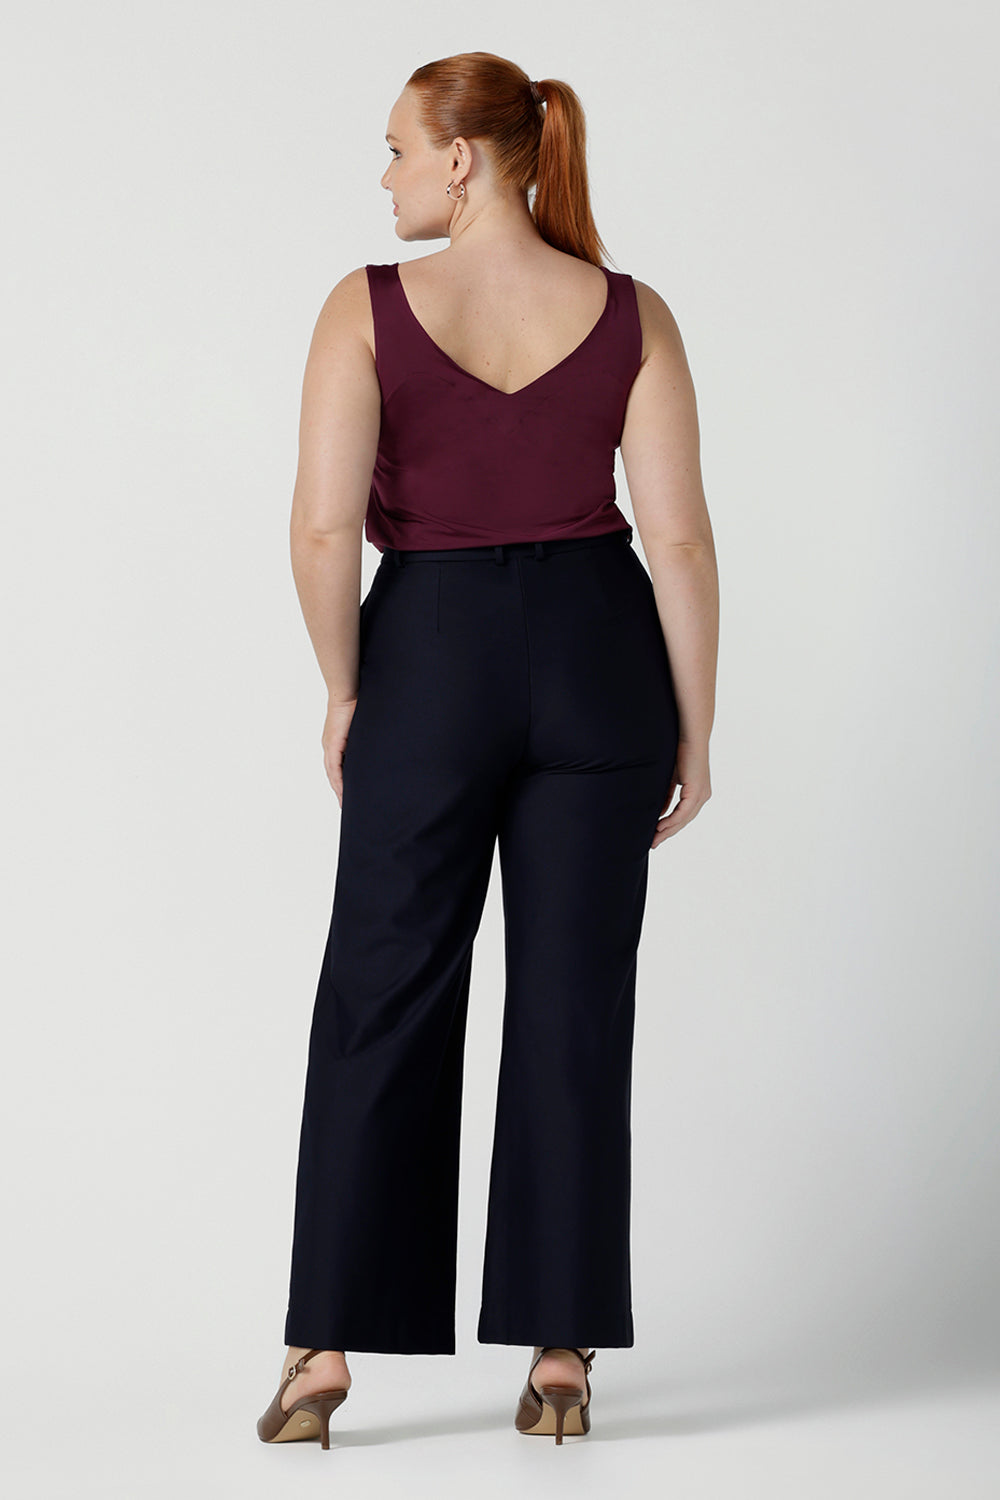 Size 12 woman wears the Eddy Cami top in Plum with wide straps. Made in Australia for women size 8 -24. style back with high waist Lulu pants in Navy. Soft tailored pants.